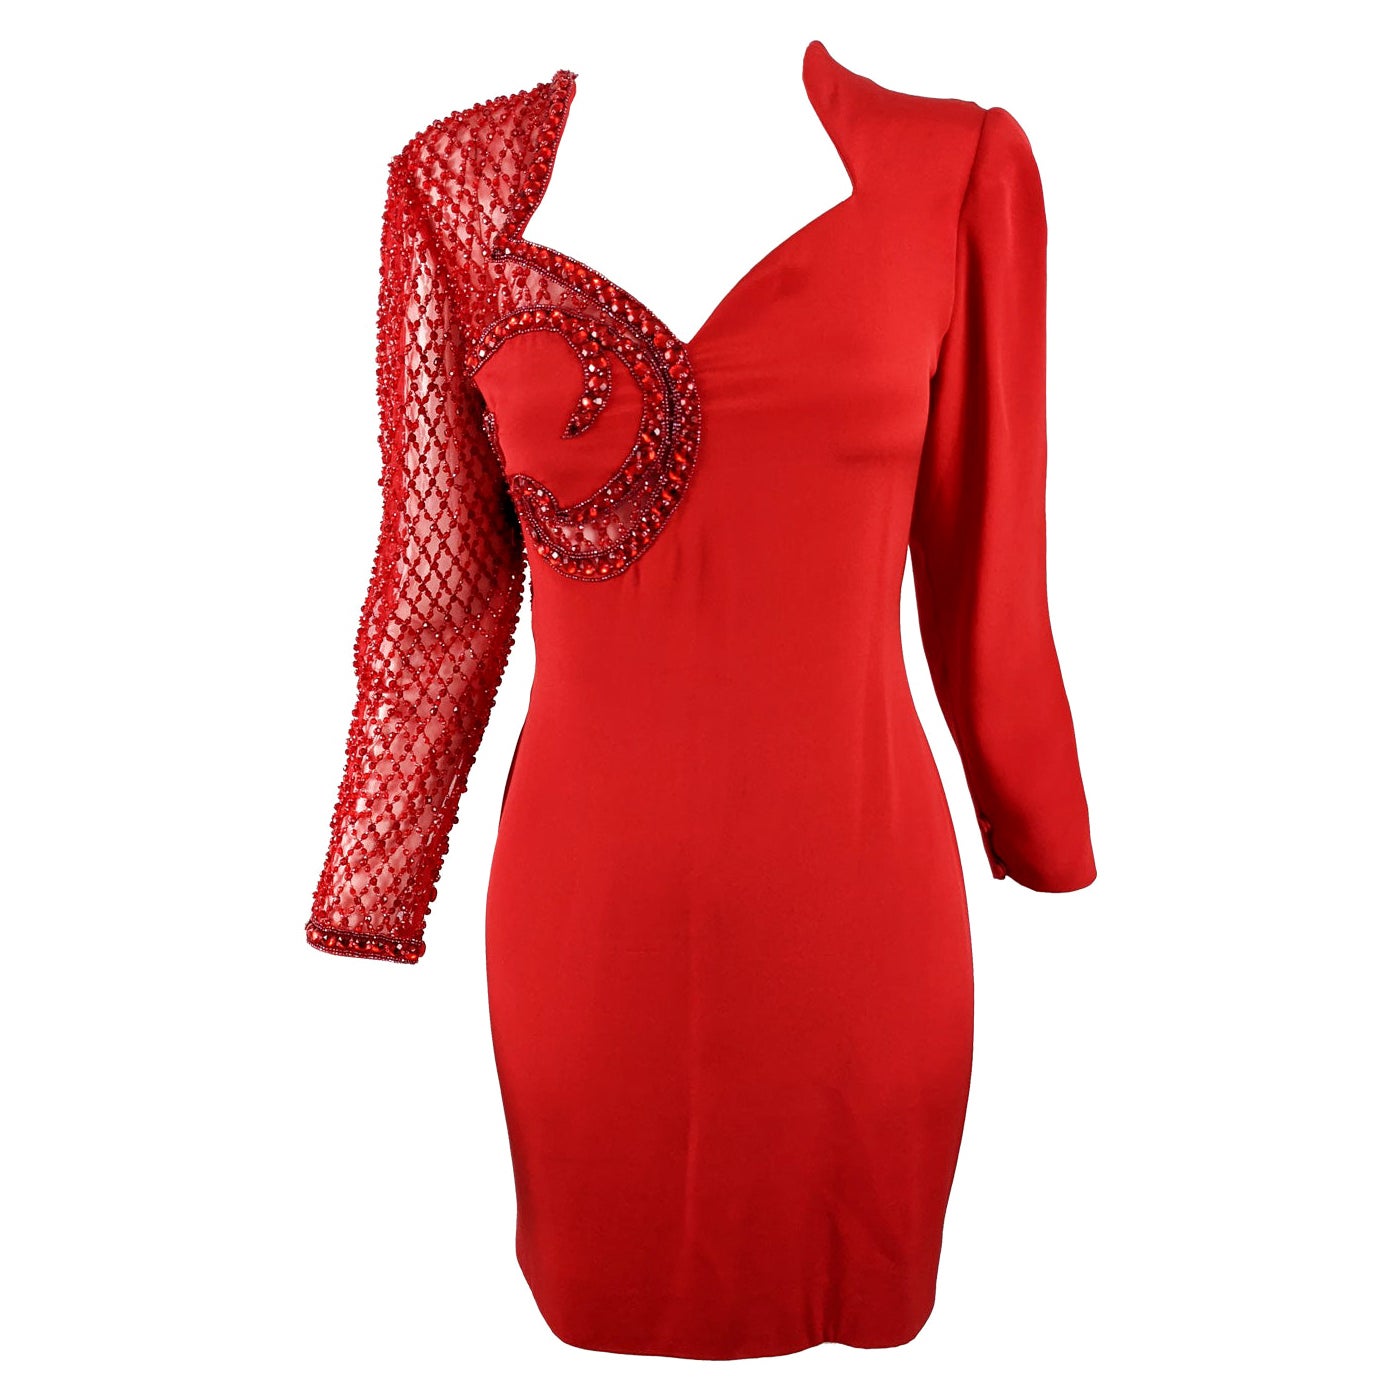 Renato Balestra Vintage Italian Couture Red Beaded Sheer Sleeve Party Dress For Sale